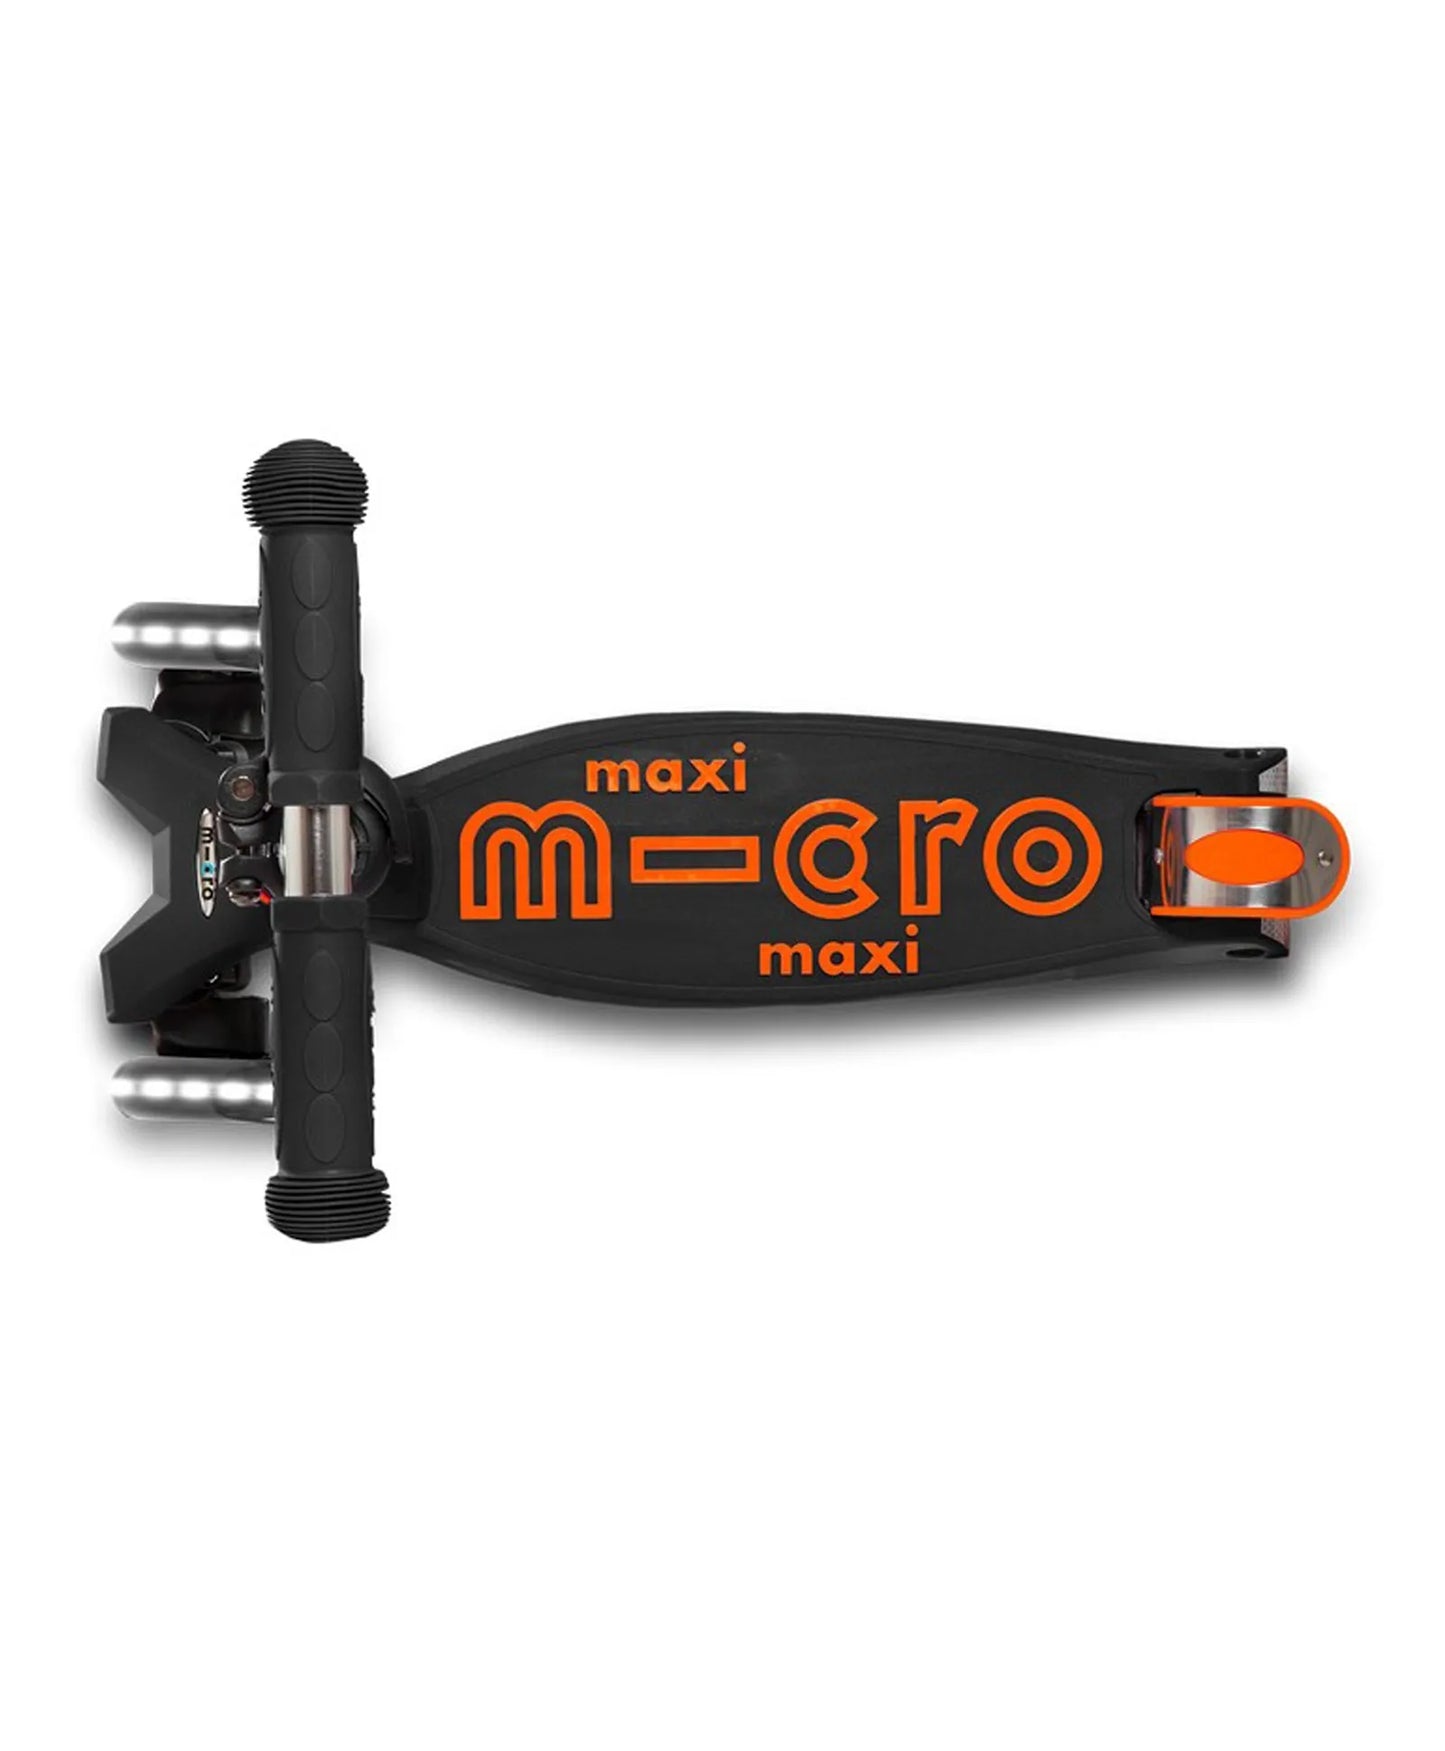 Micro Maxi Deluxe Scooter with LED Wheel - Black & Orange - Laadlee